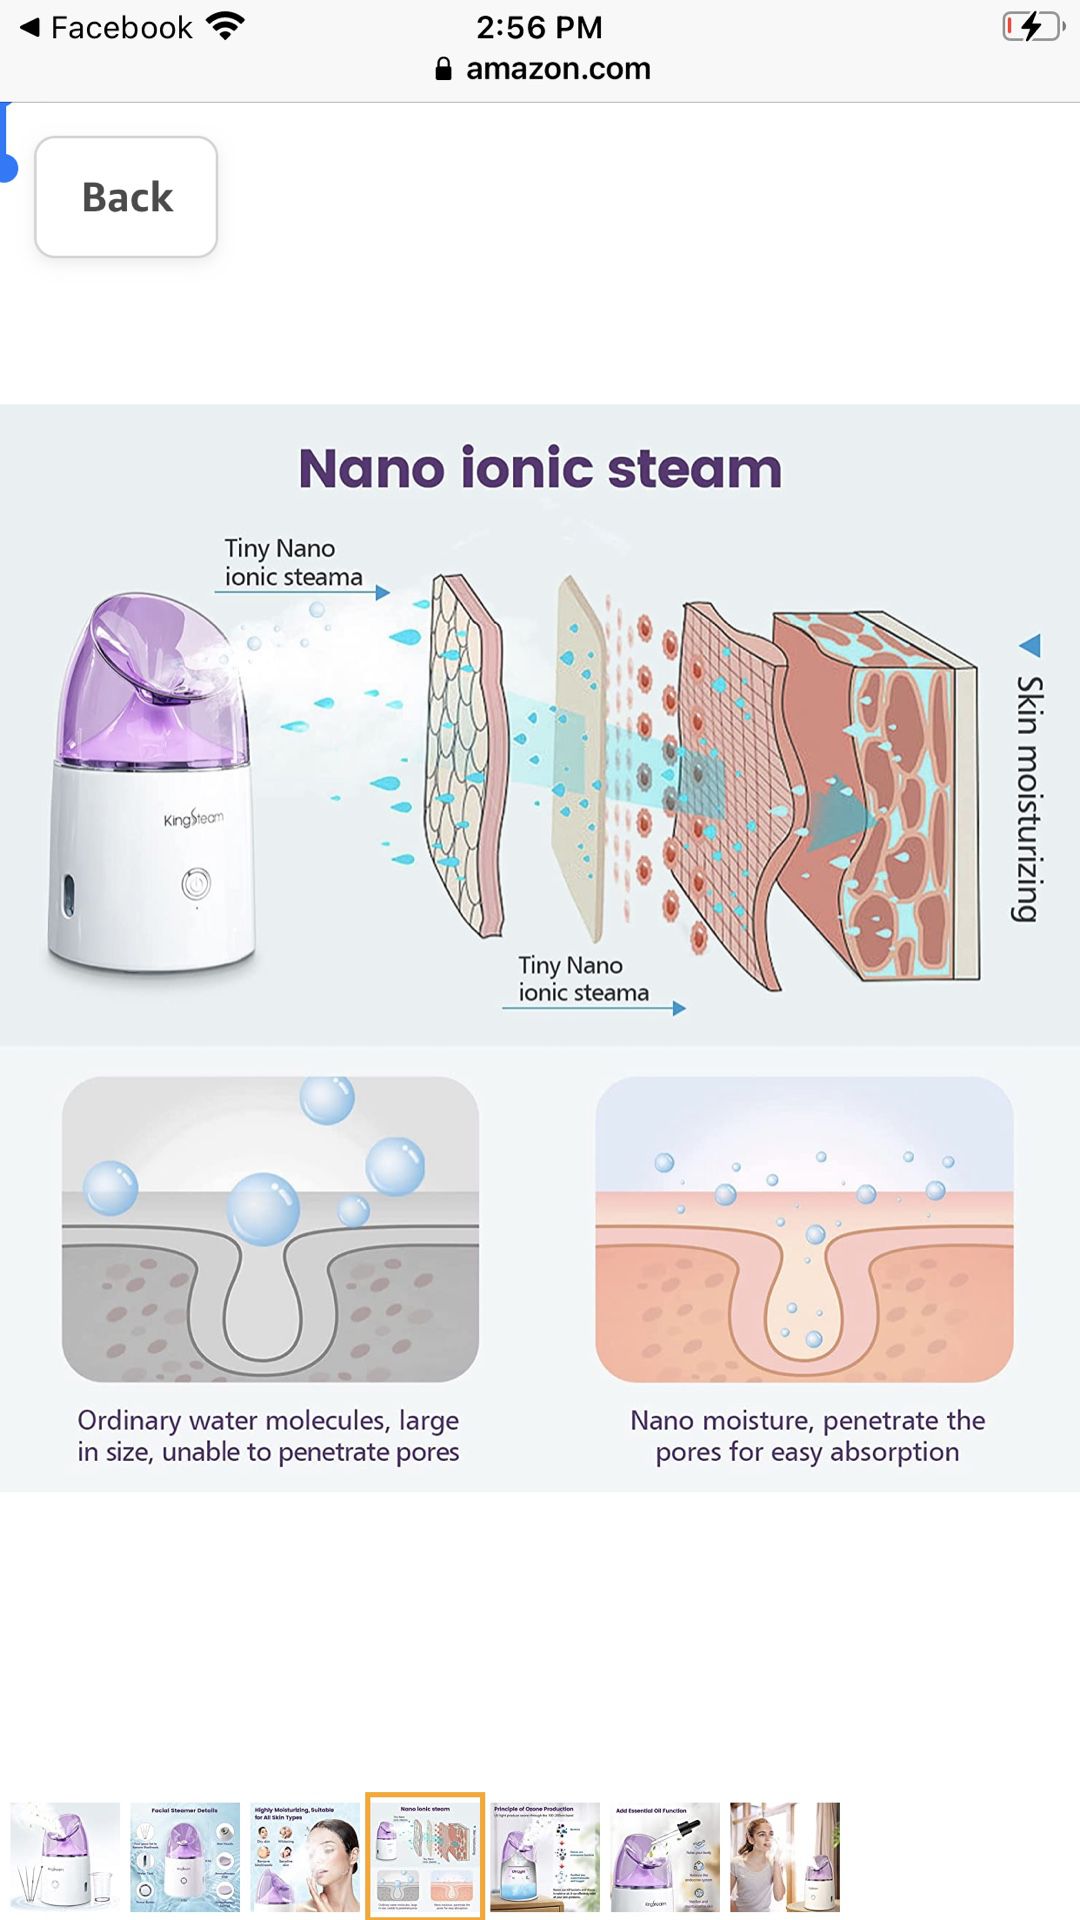  Nano Ionic Facial Steamer，Face Steamer for Home Facial Deep Cleaning, Facial Mister with Moisturizing & Blackhead Removal Kits for Estheticians, Home